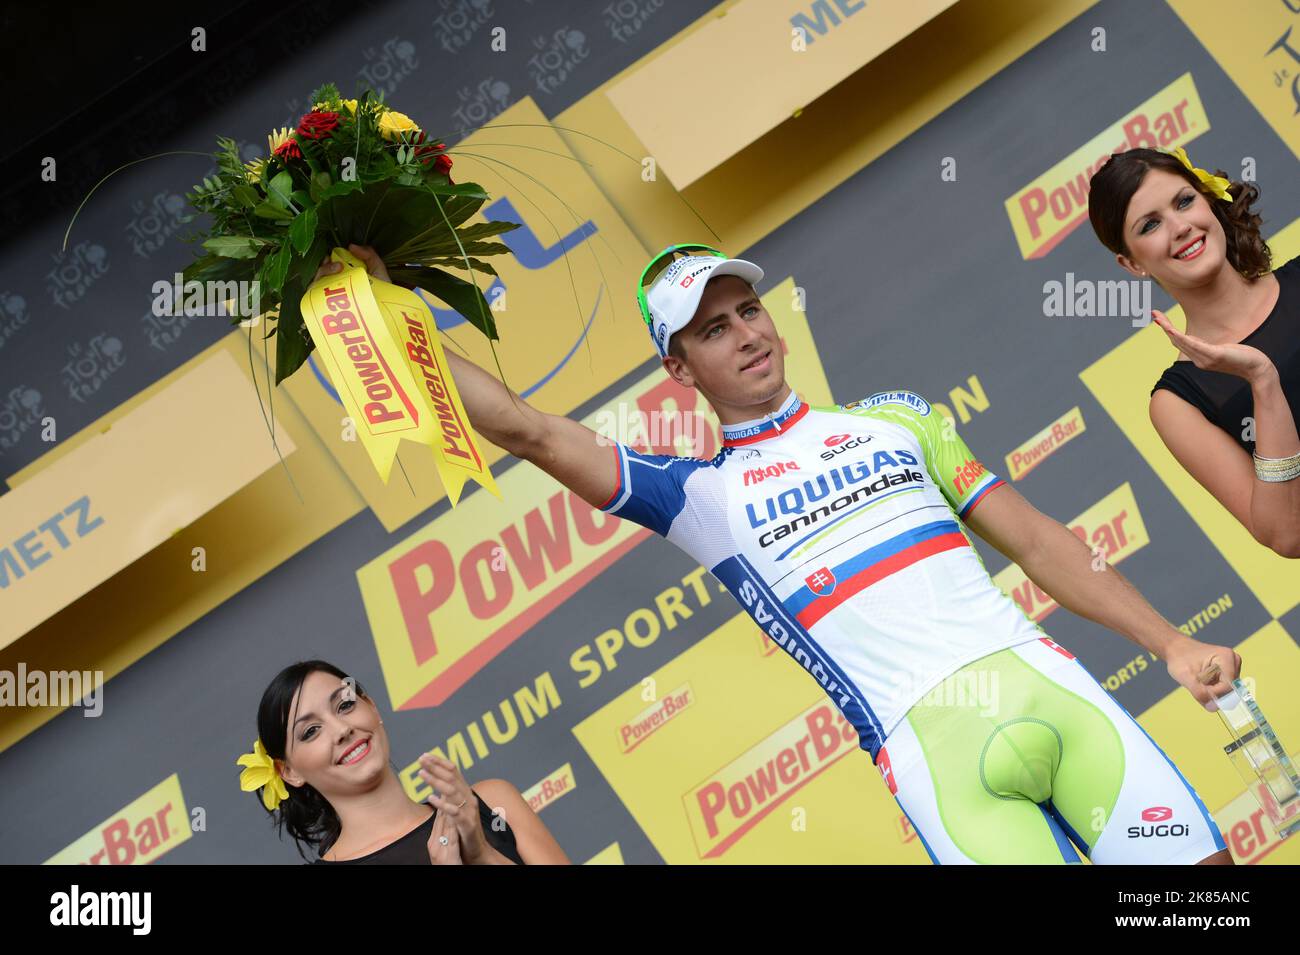 Peter Sagan takes the stage win ahead of Andre Greipel and Matthew Goss and Kenny Rober Van Hummel during Stage 6 of the 2012 Tour de France and stands on the podium to collect his trophy Stock Photo